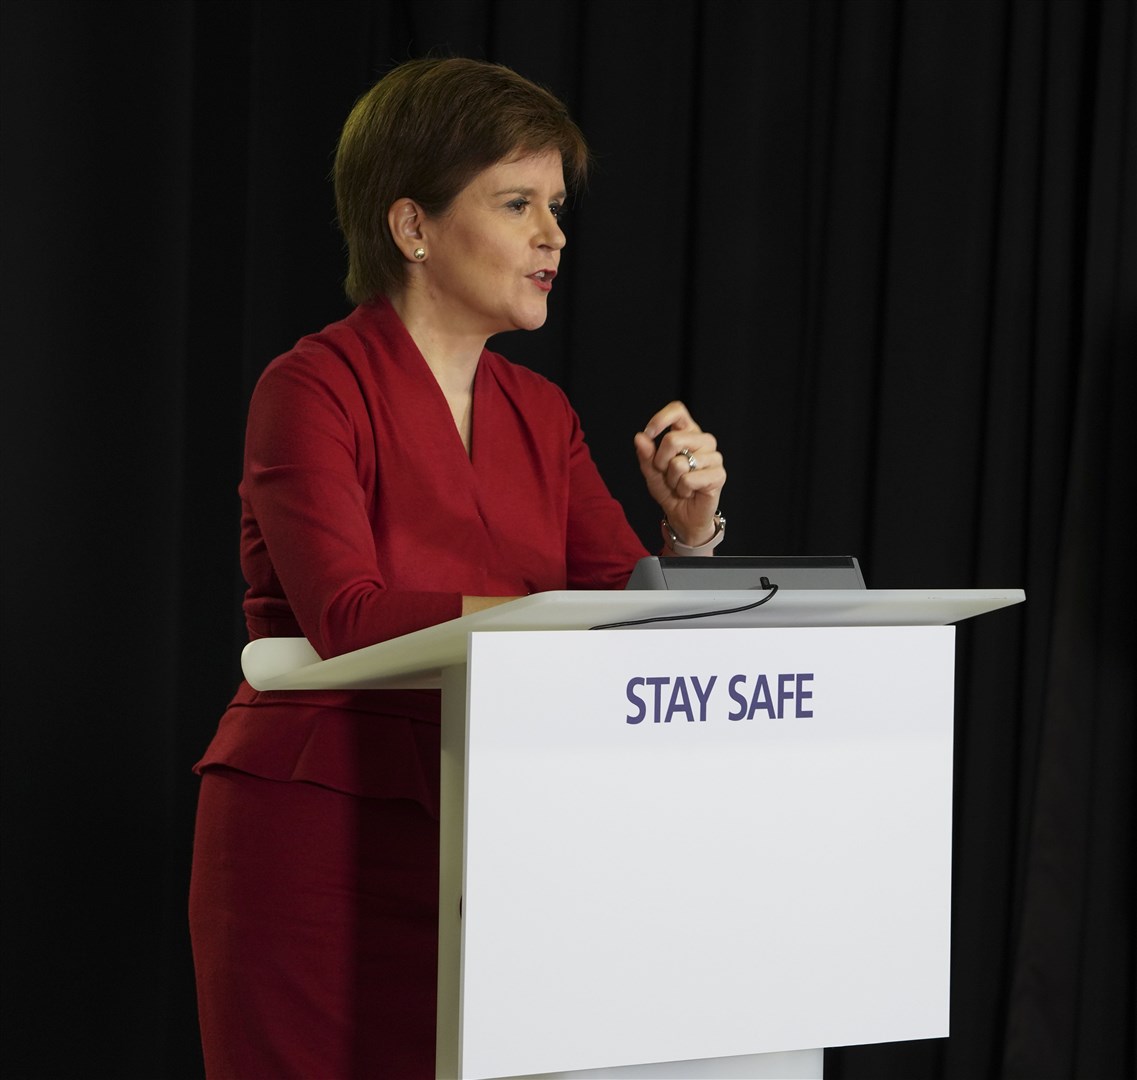 Nicola Sturgeon said the 'difficult decision' was driven by evidence and aims to prevent a spike in cases in the weeks to come.